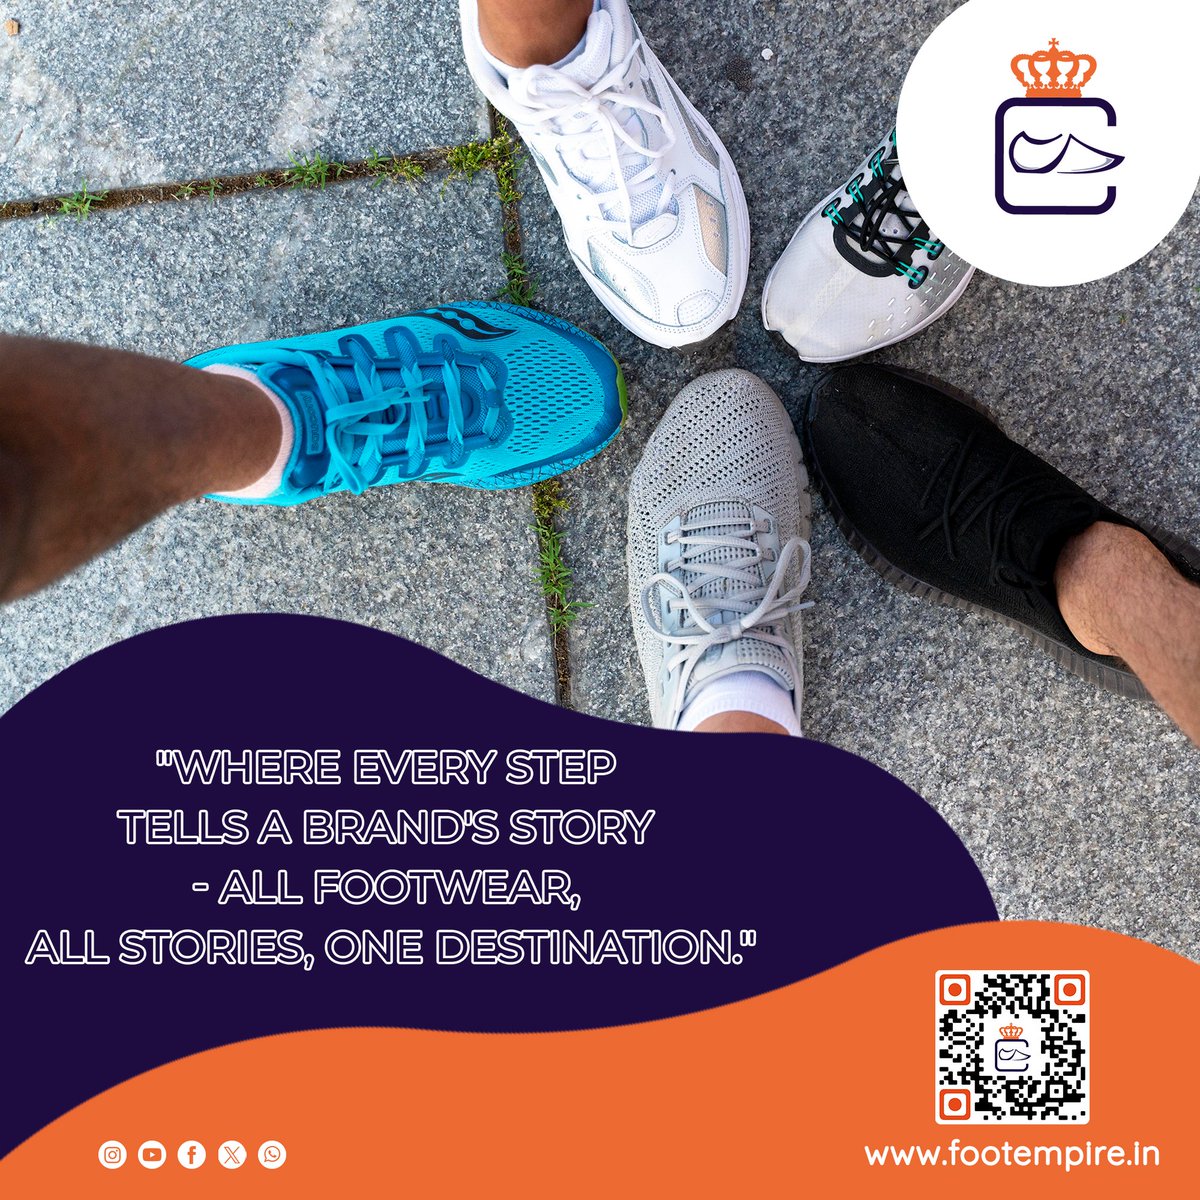 Step into style with Foot Empire. Elevate your fashion game from the ground up. #FootEmpire #FashionForwardFeet #WalkInStyle #ShoeGameOnPoint #StepIntoFashion #FashionFootwear #ShoeObsession #StrutInStyle #FootwearFaves #SneakerHead #HeelsOnFleek #ShoeLover #StyleInEveryStep